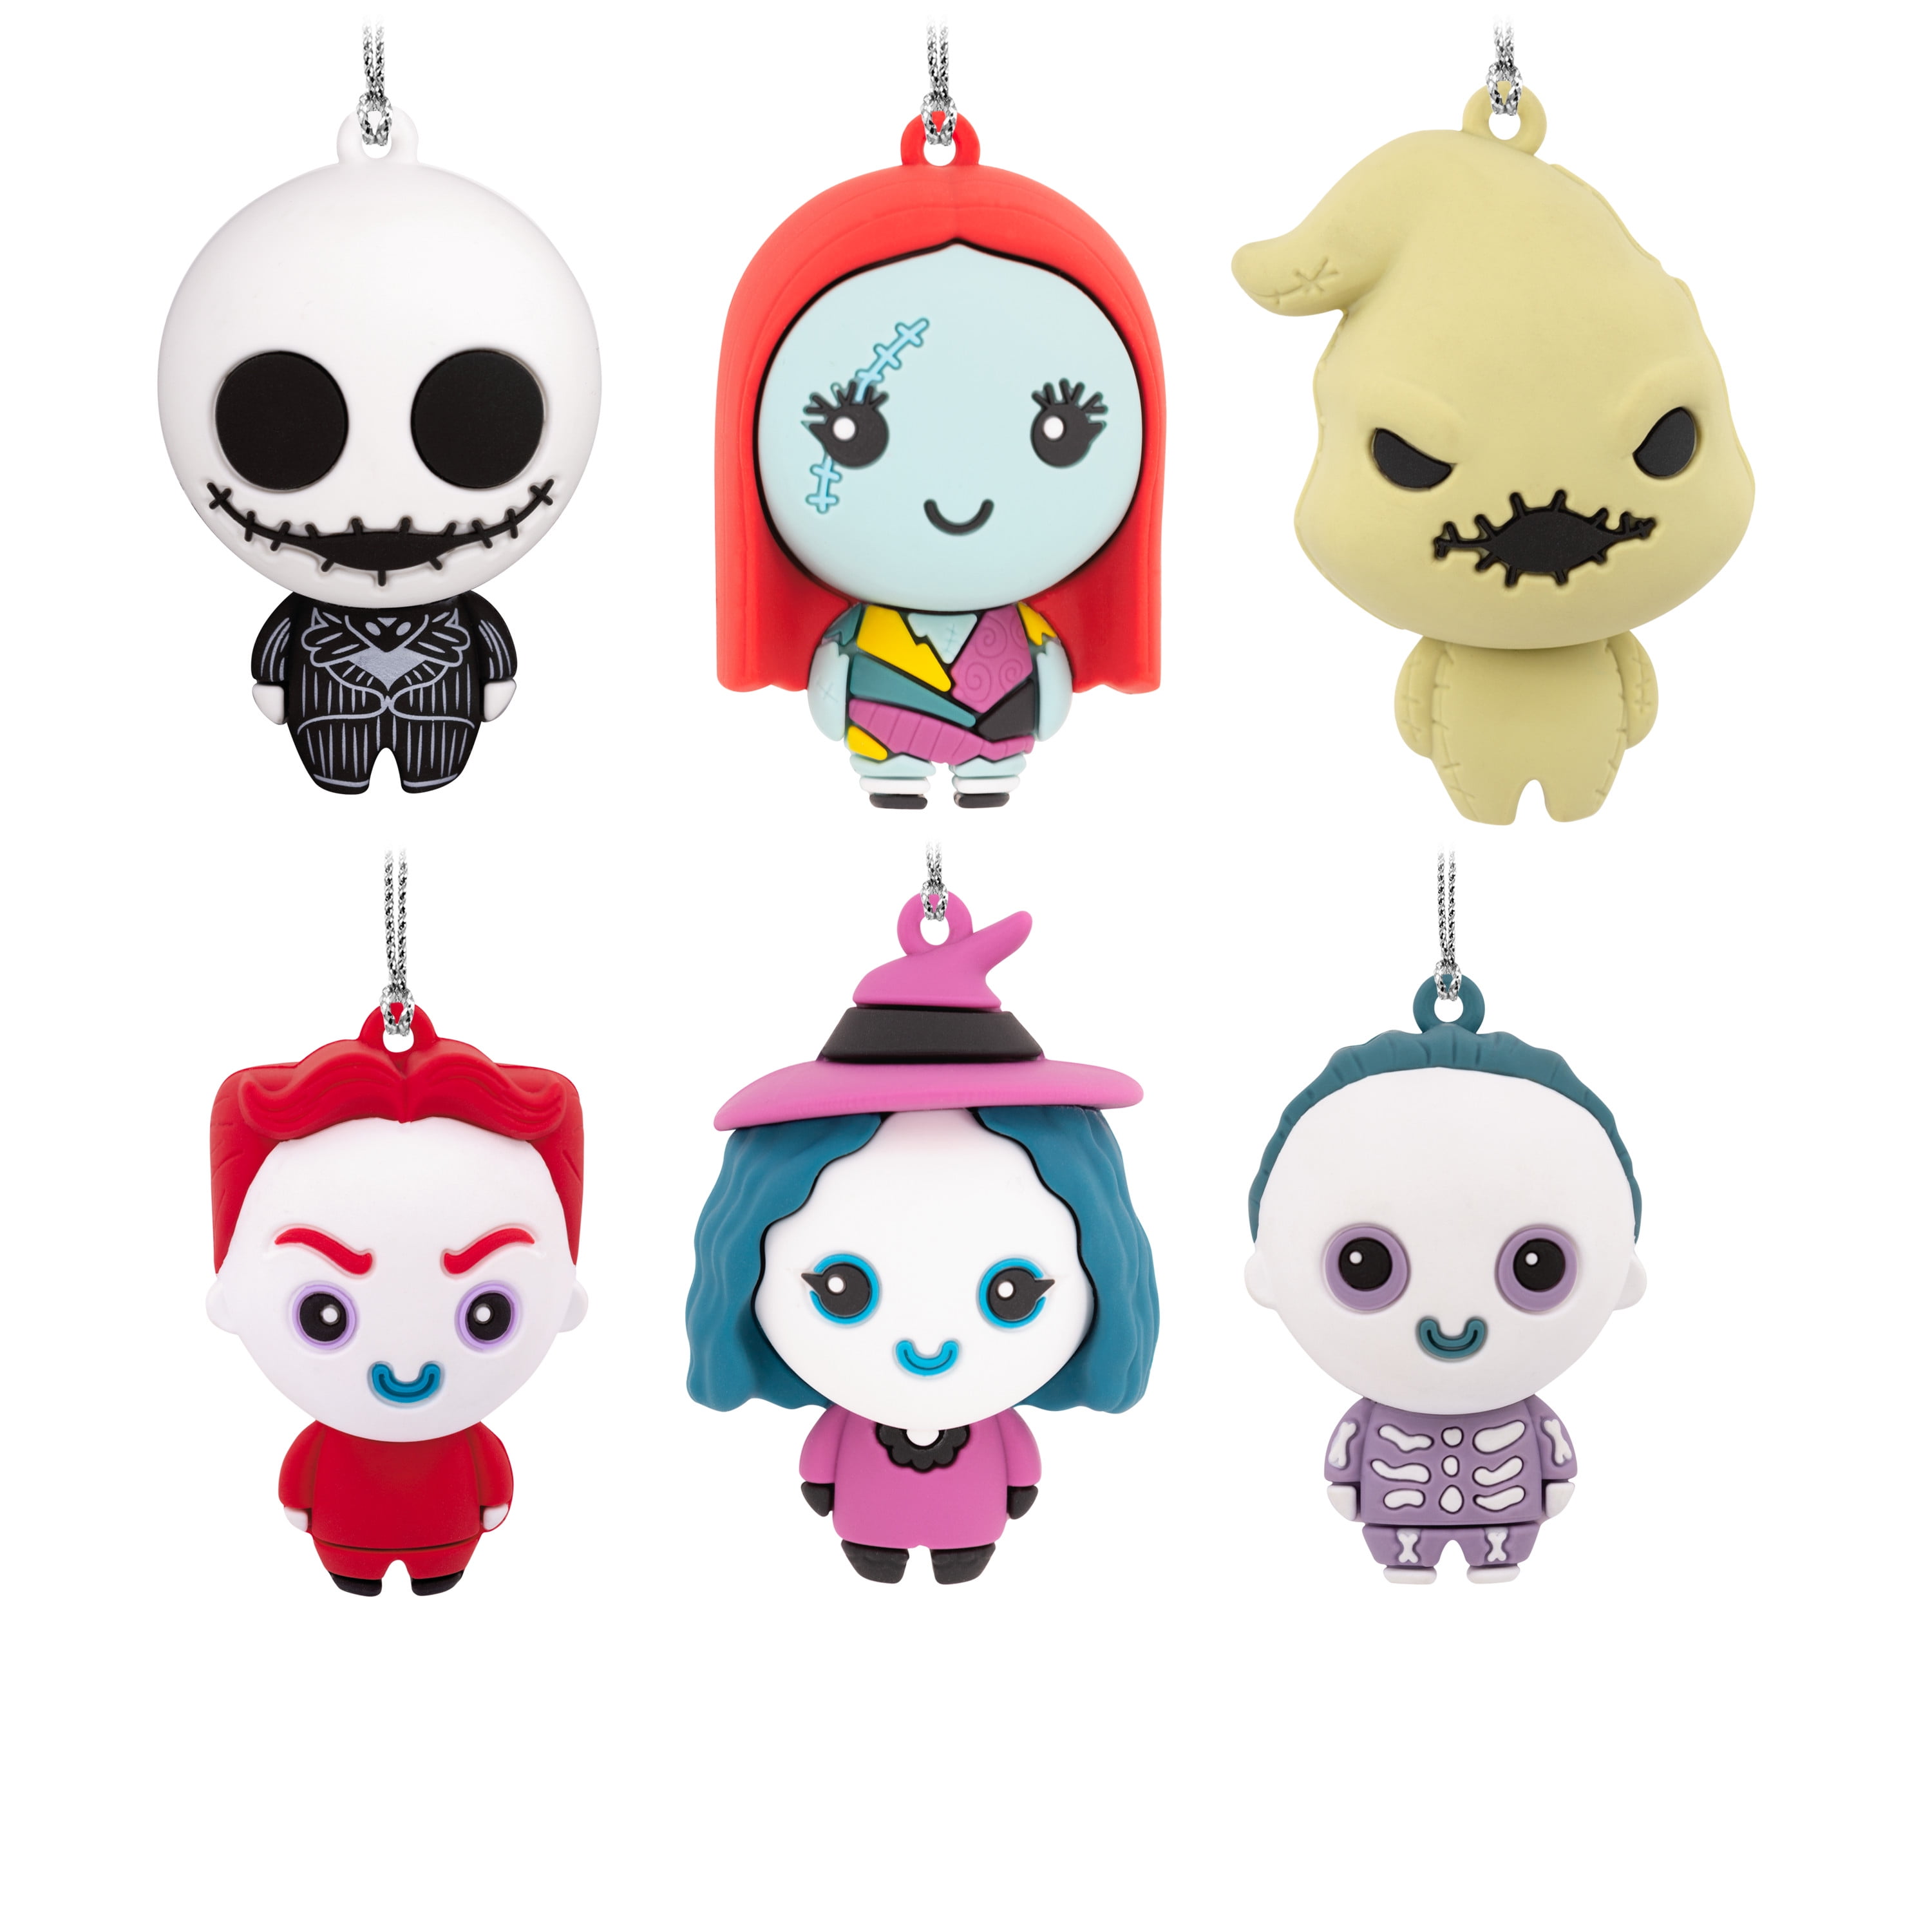 The nightmare before Christmas ornaments